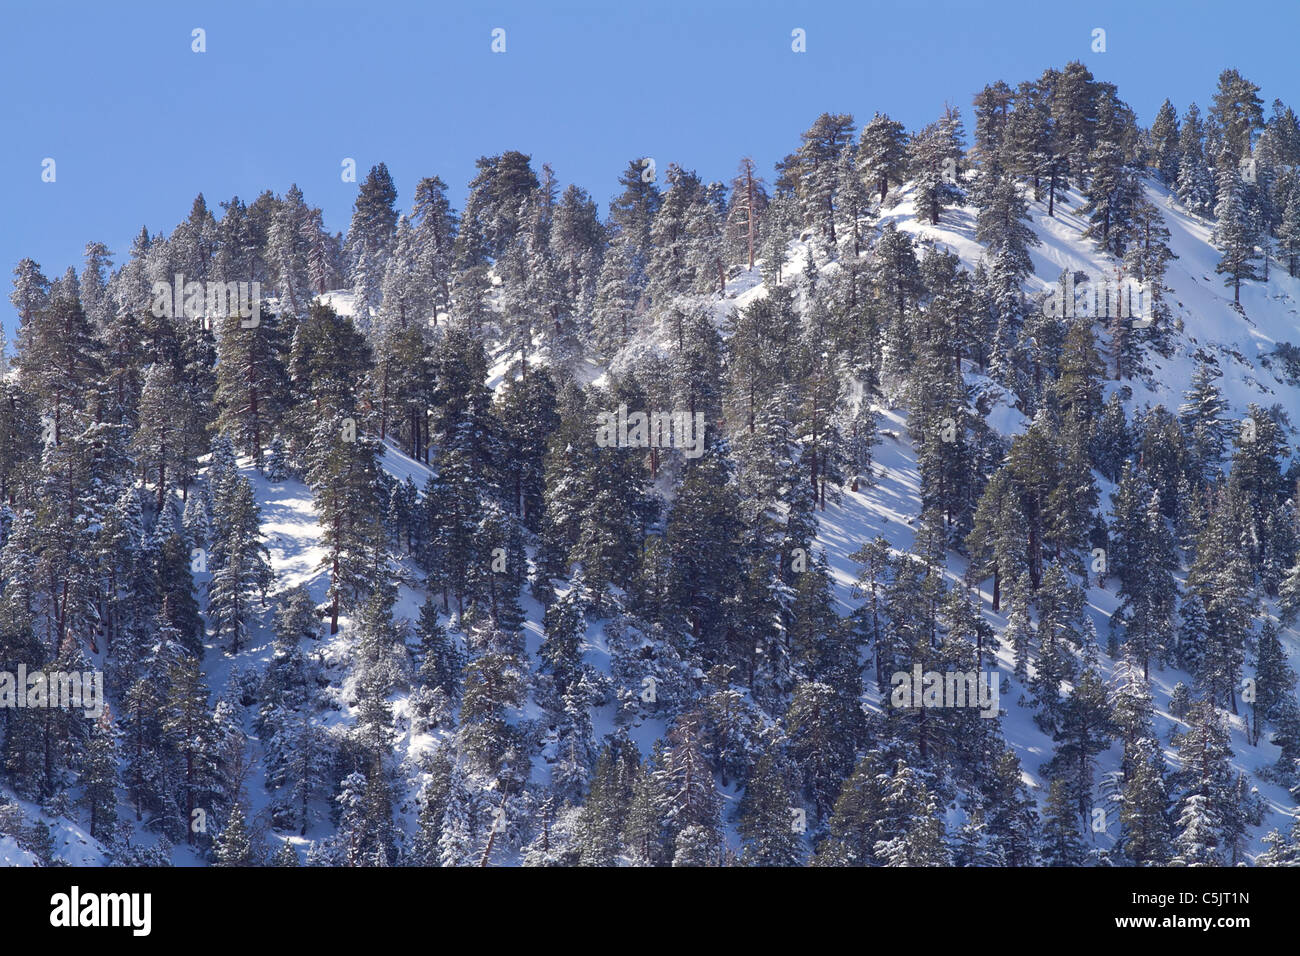 Winter trees in Wrightwood, California. Stock Photo